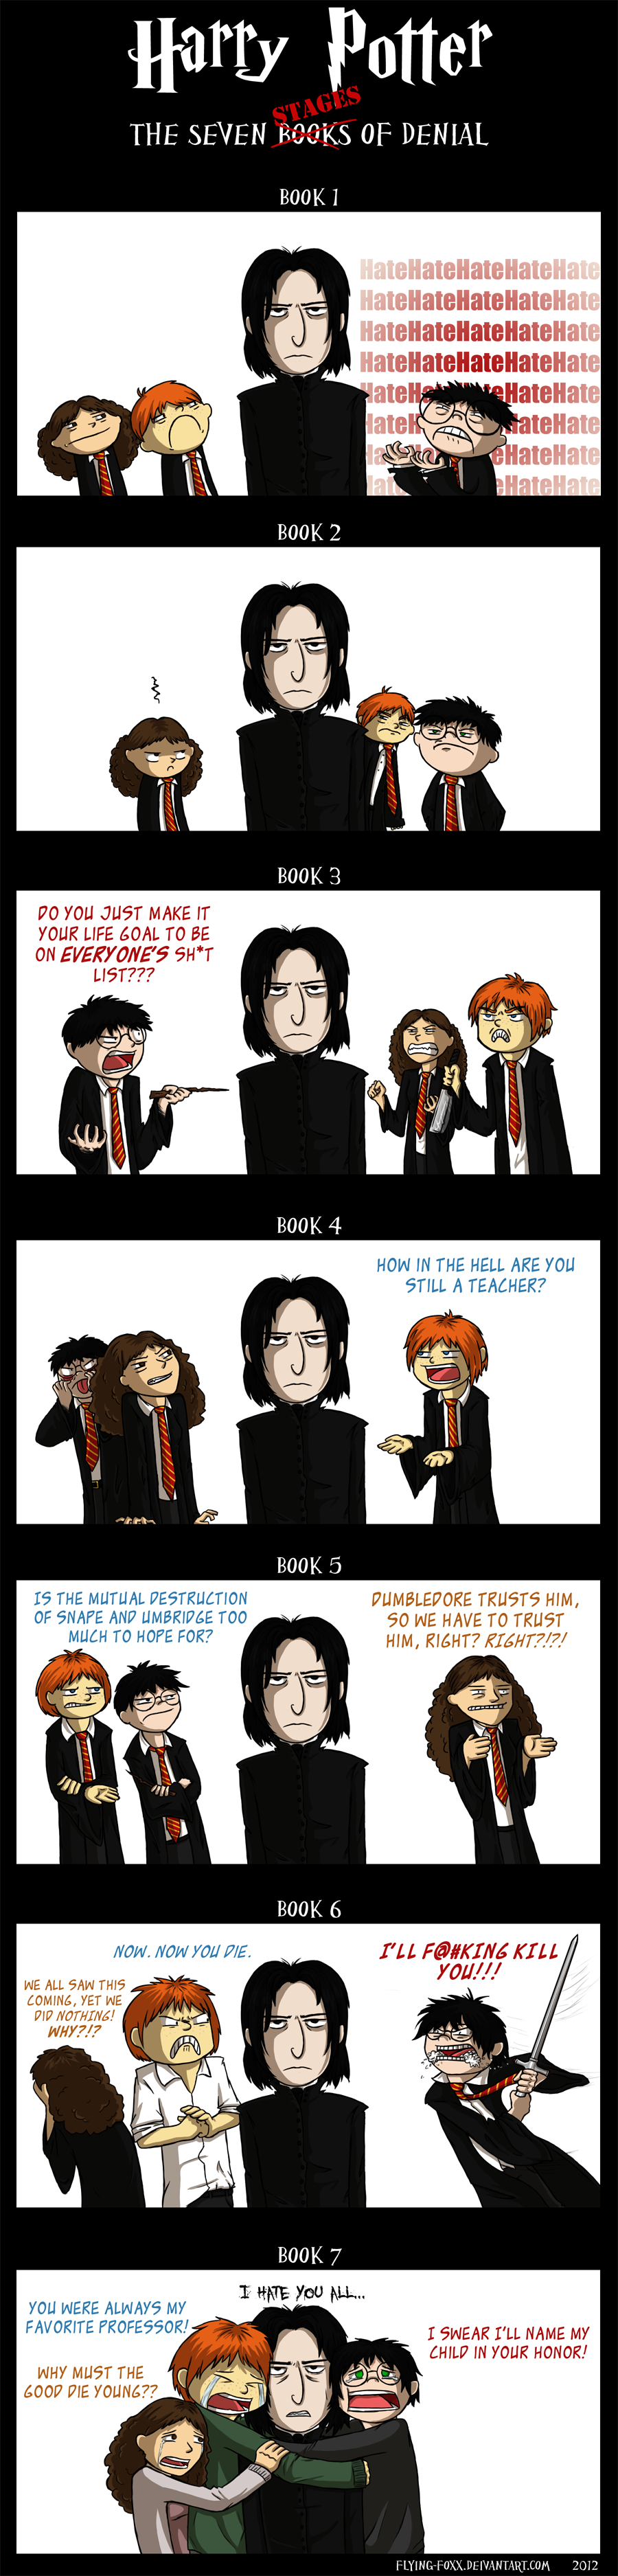 Harry Potter: The 7 Stages of Denial